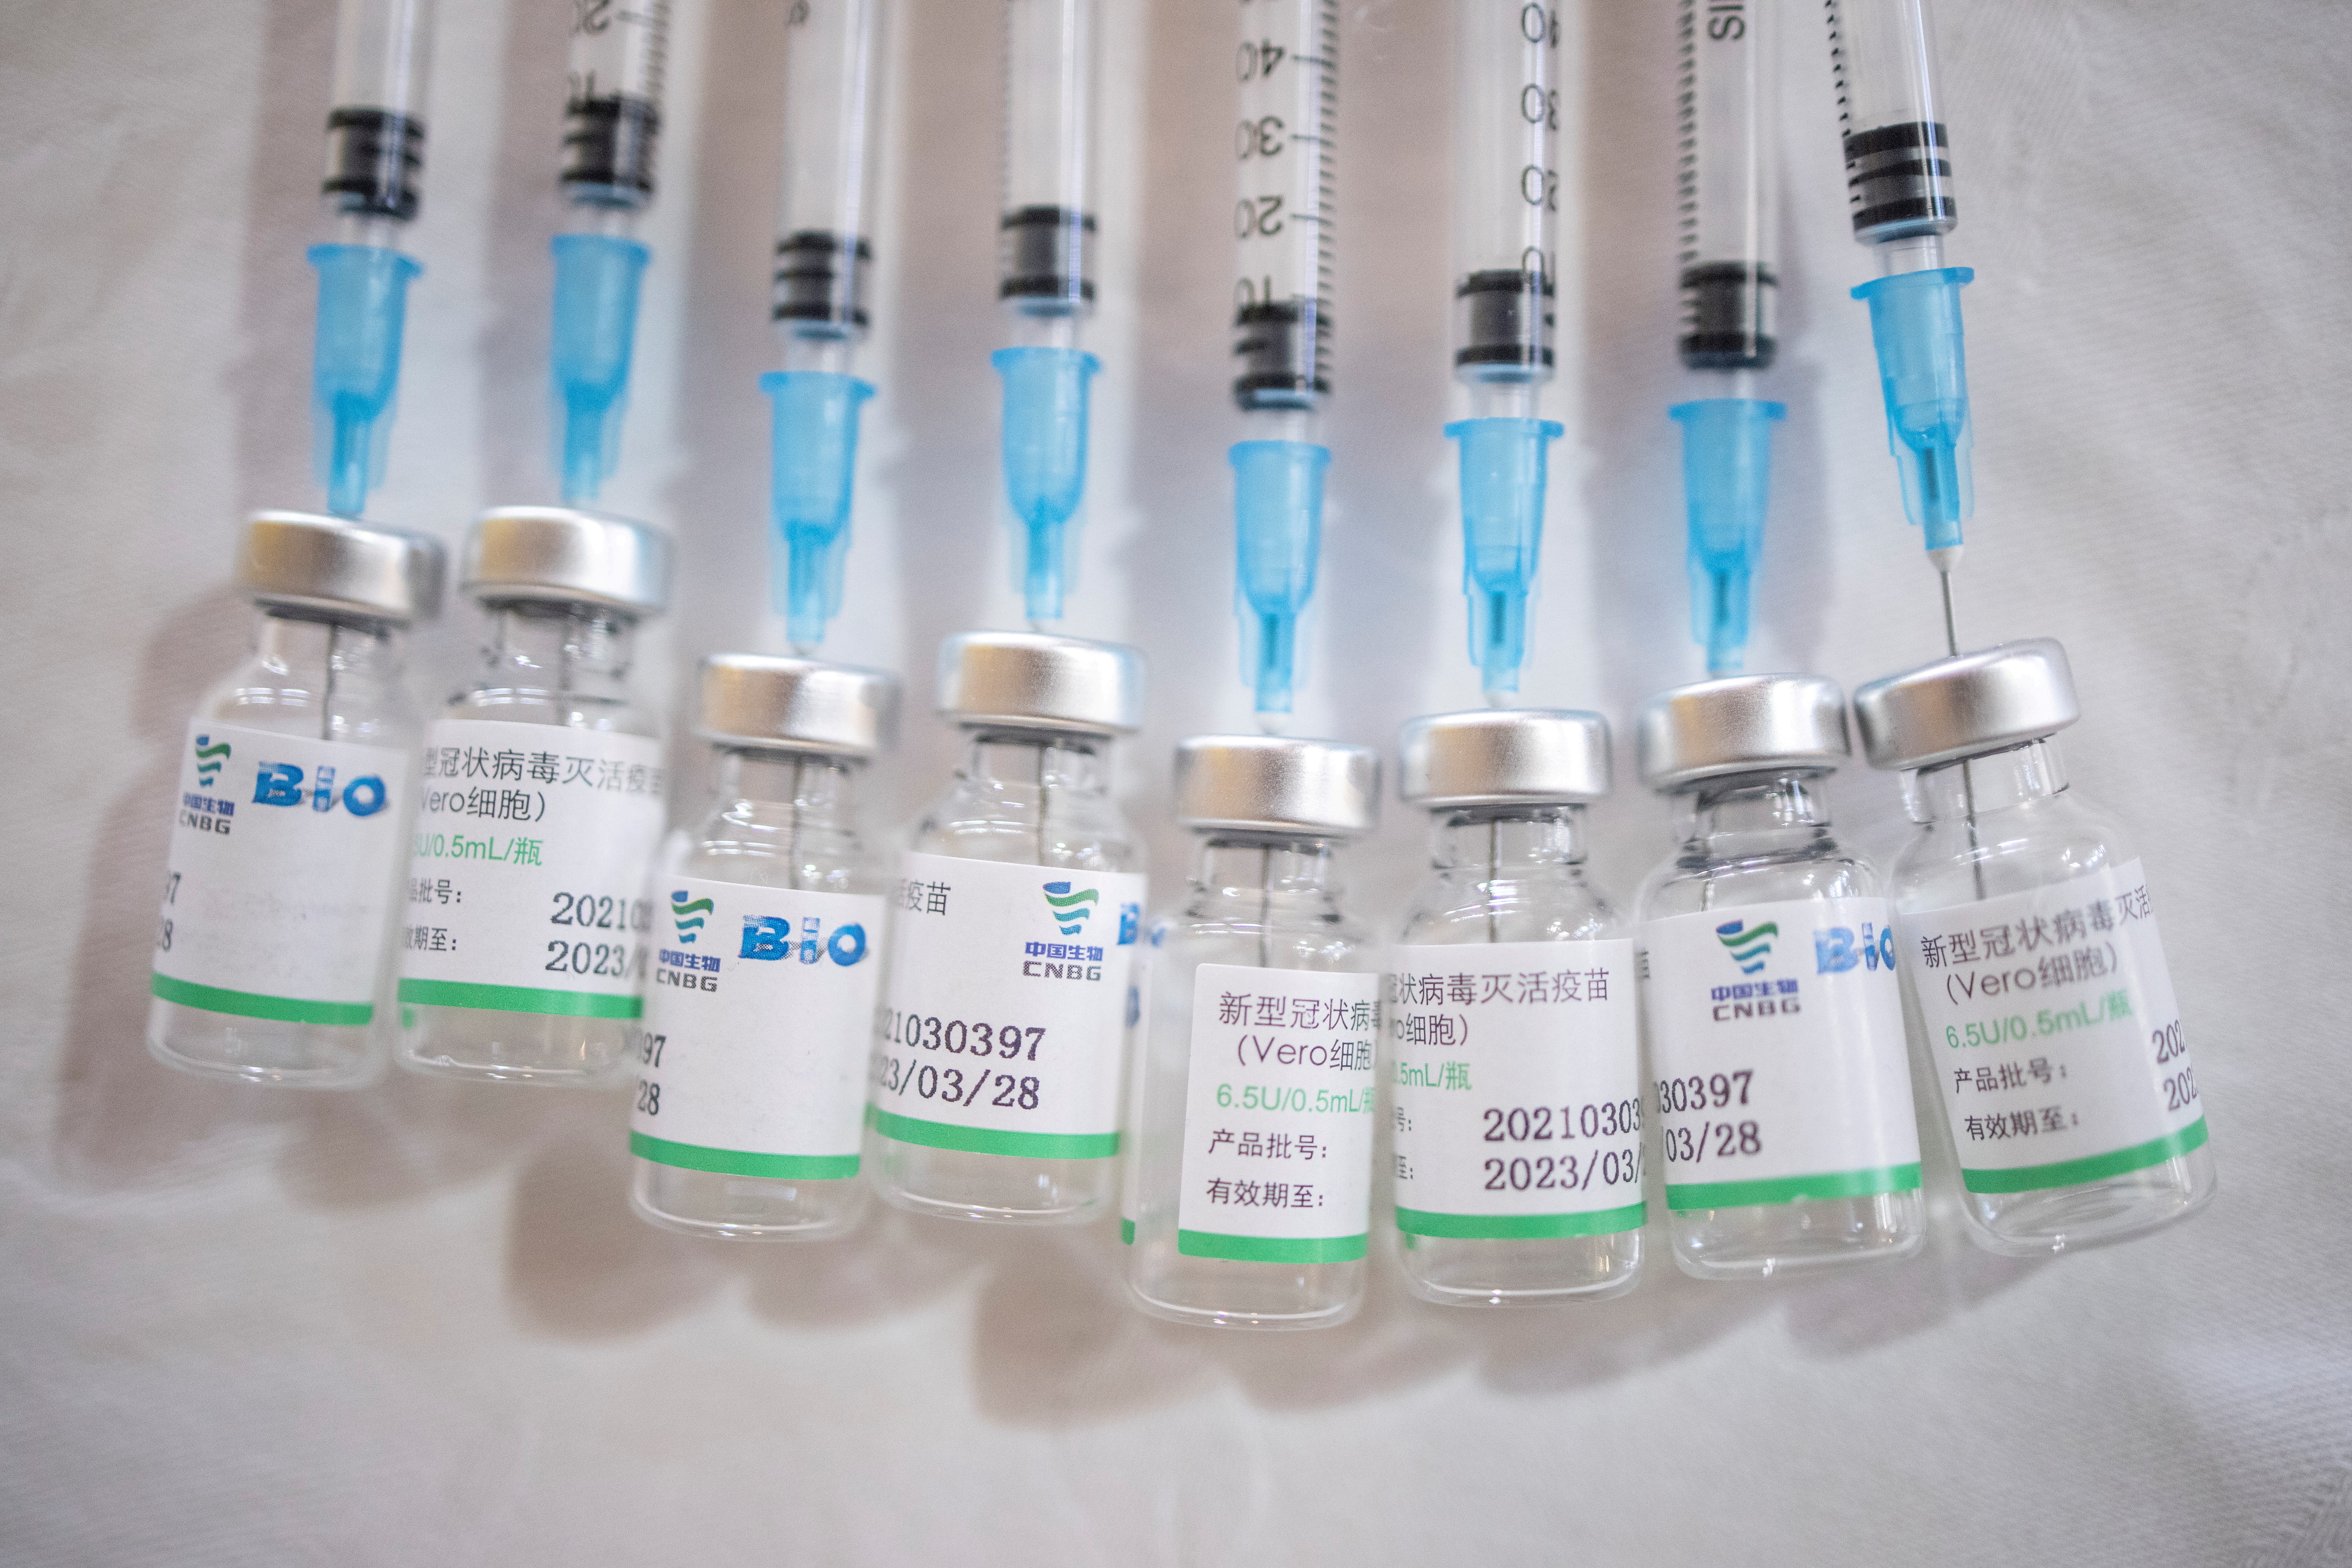 Doses of the Chinese Sinopharm vaccine